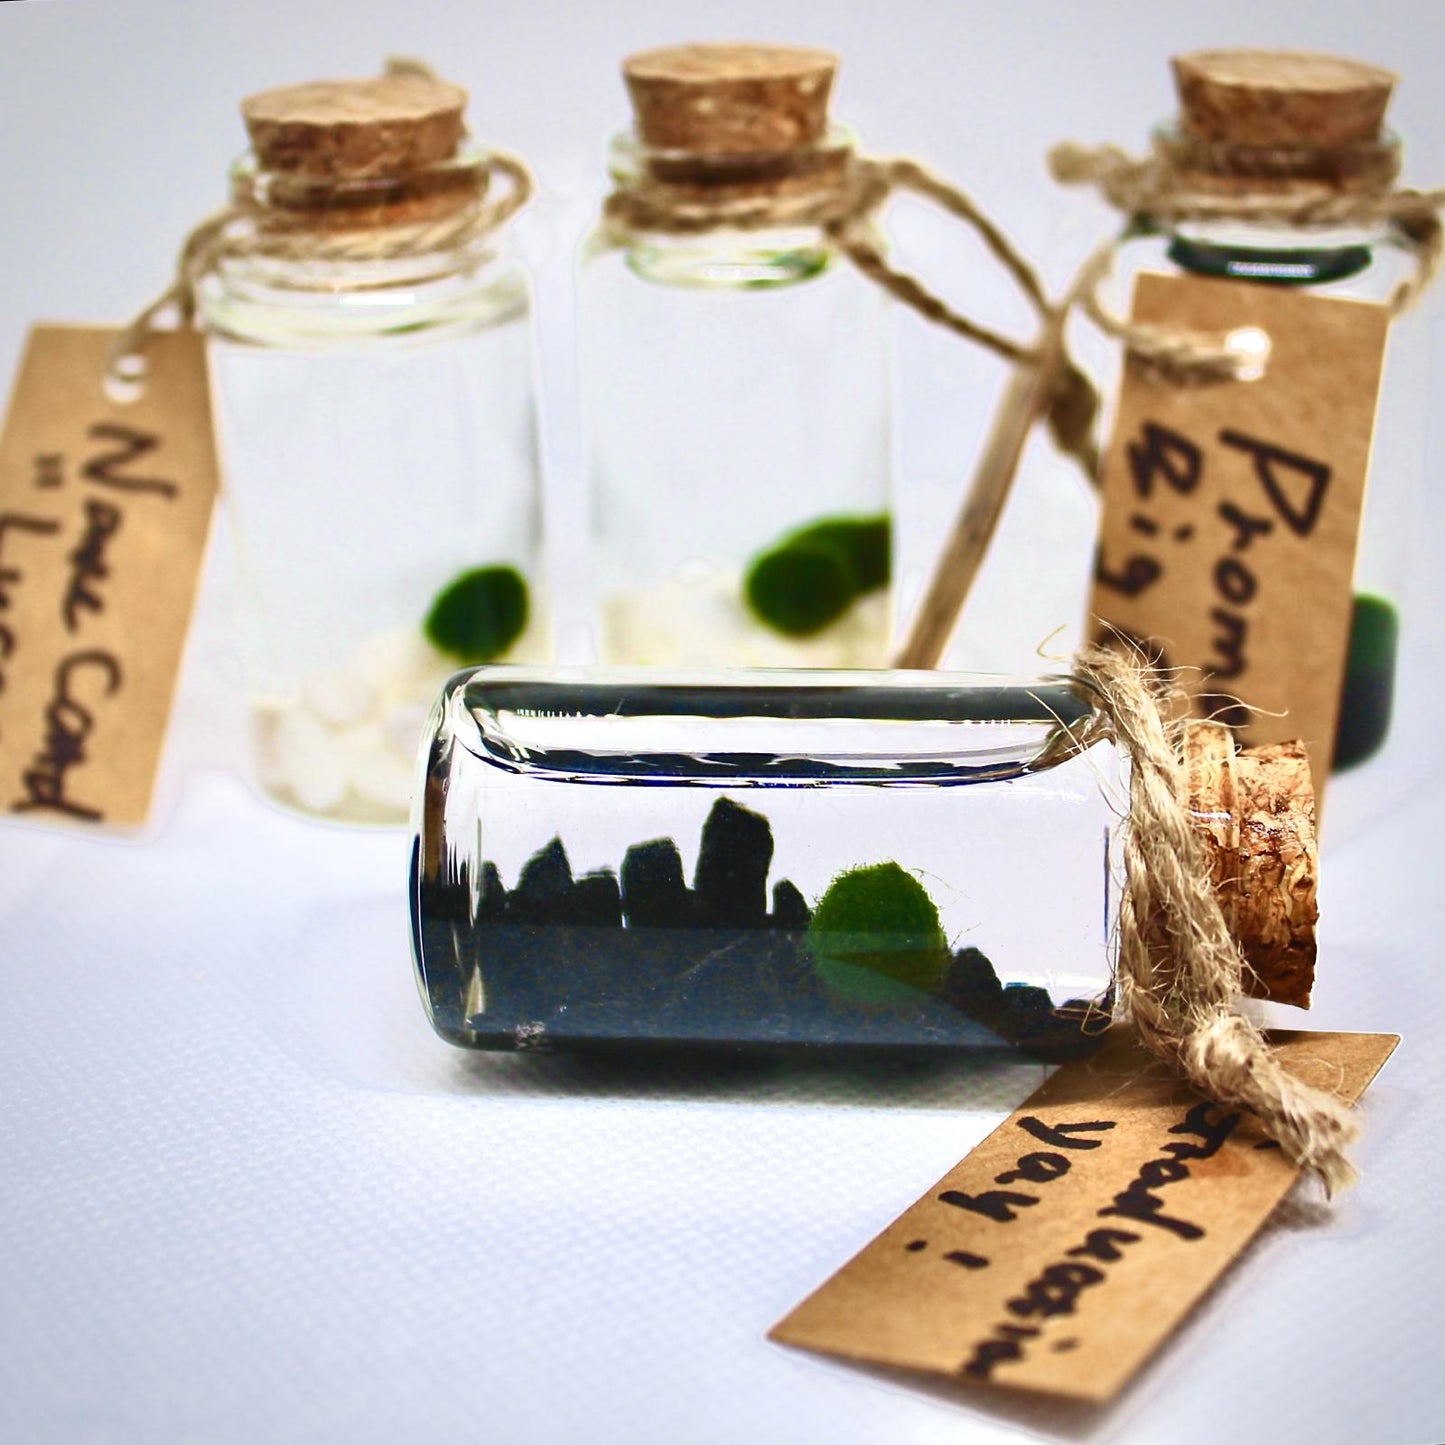 Live Mini Marimo Moss Ball White and Black Pebbles Glass Bottle Glass Specification:
0.8-1.5cm Marimo Live Moss Ball * 1
(Optional: adding more marimo...)
White/Black Pebbles Bag *1
String *1
Name Card *1
Tweezer *1
Simple Care Instruc